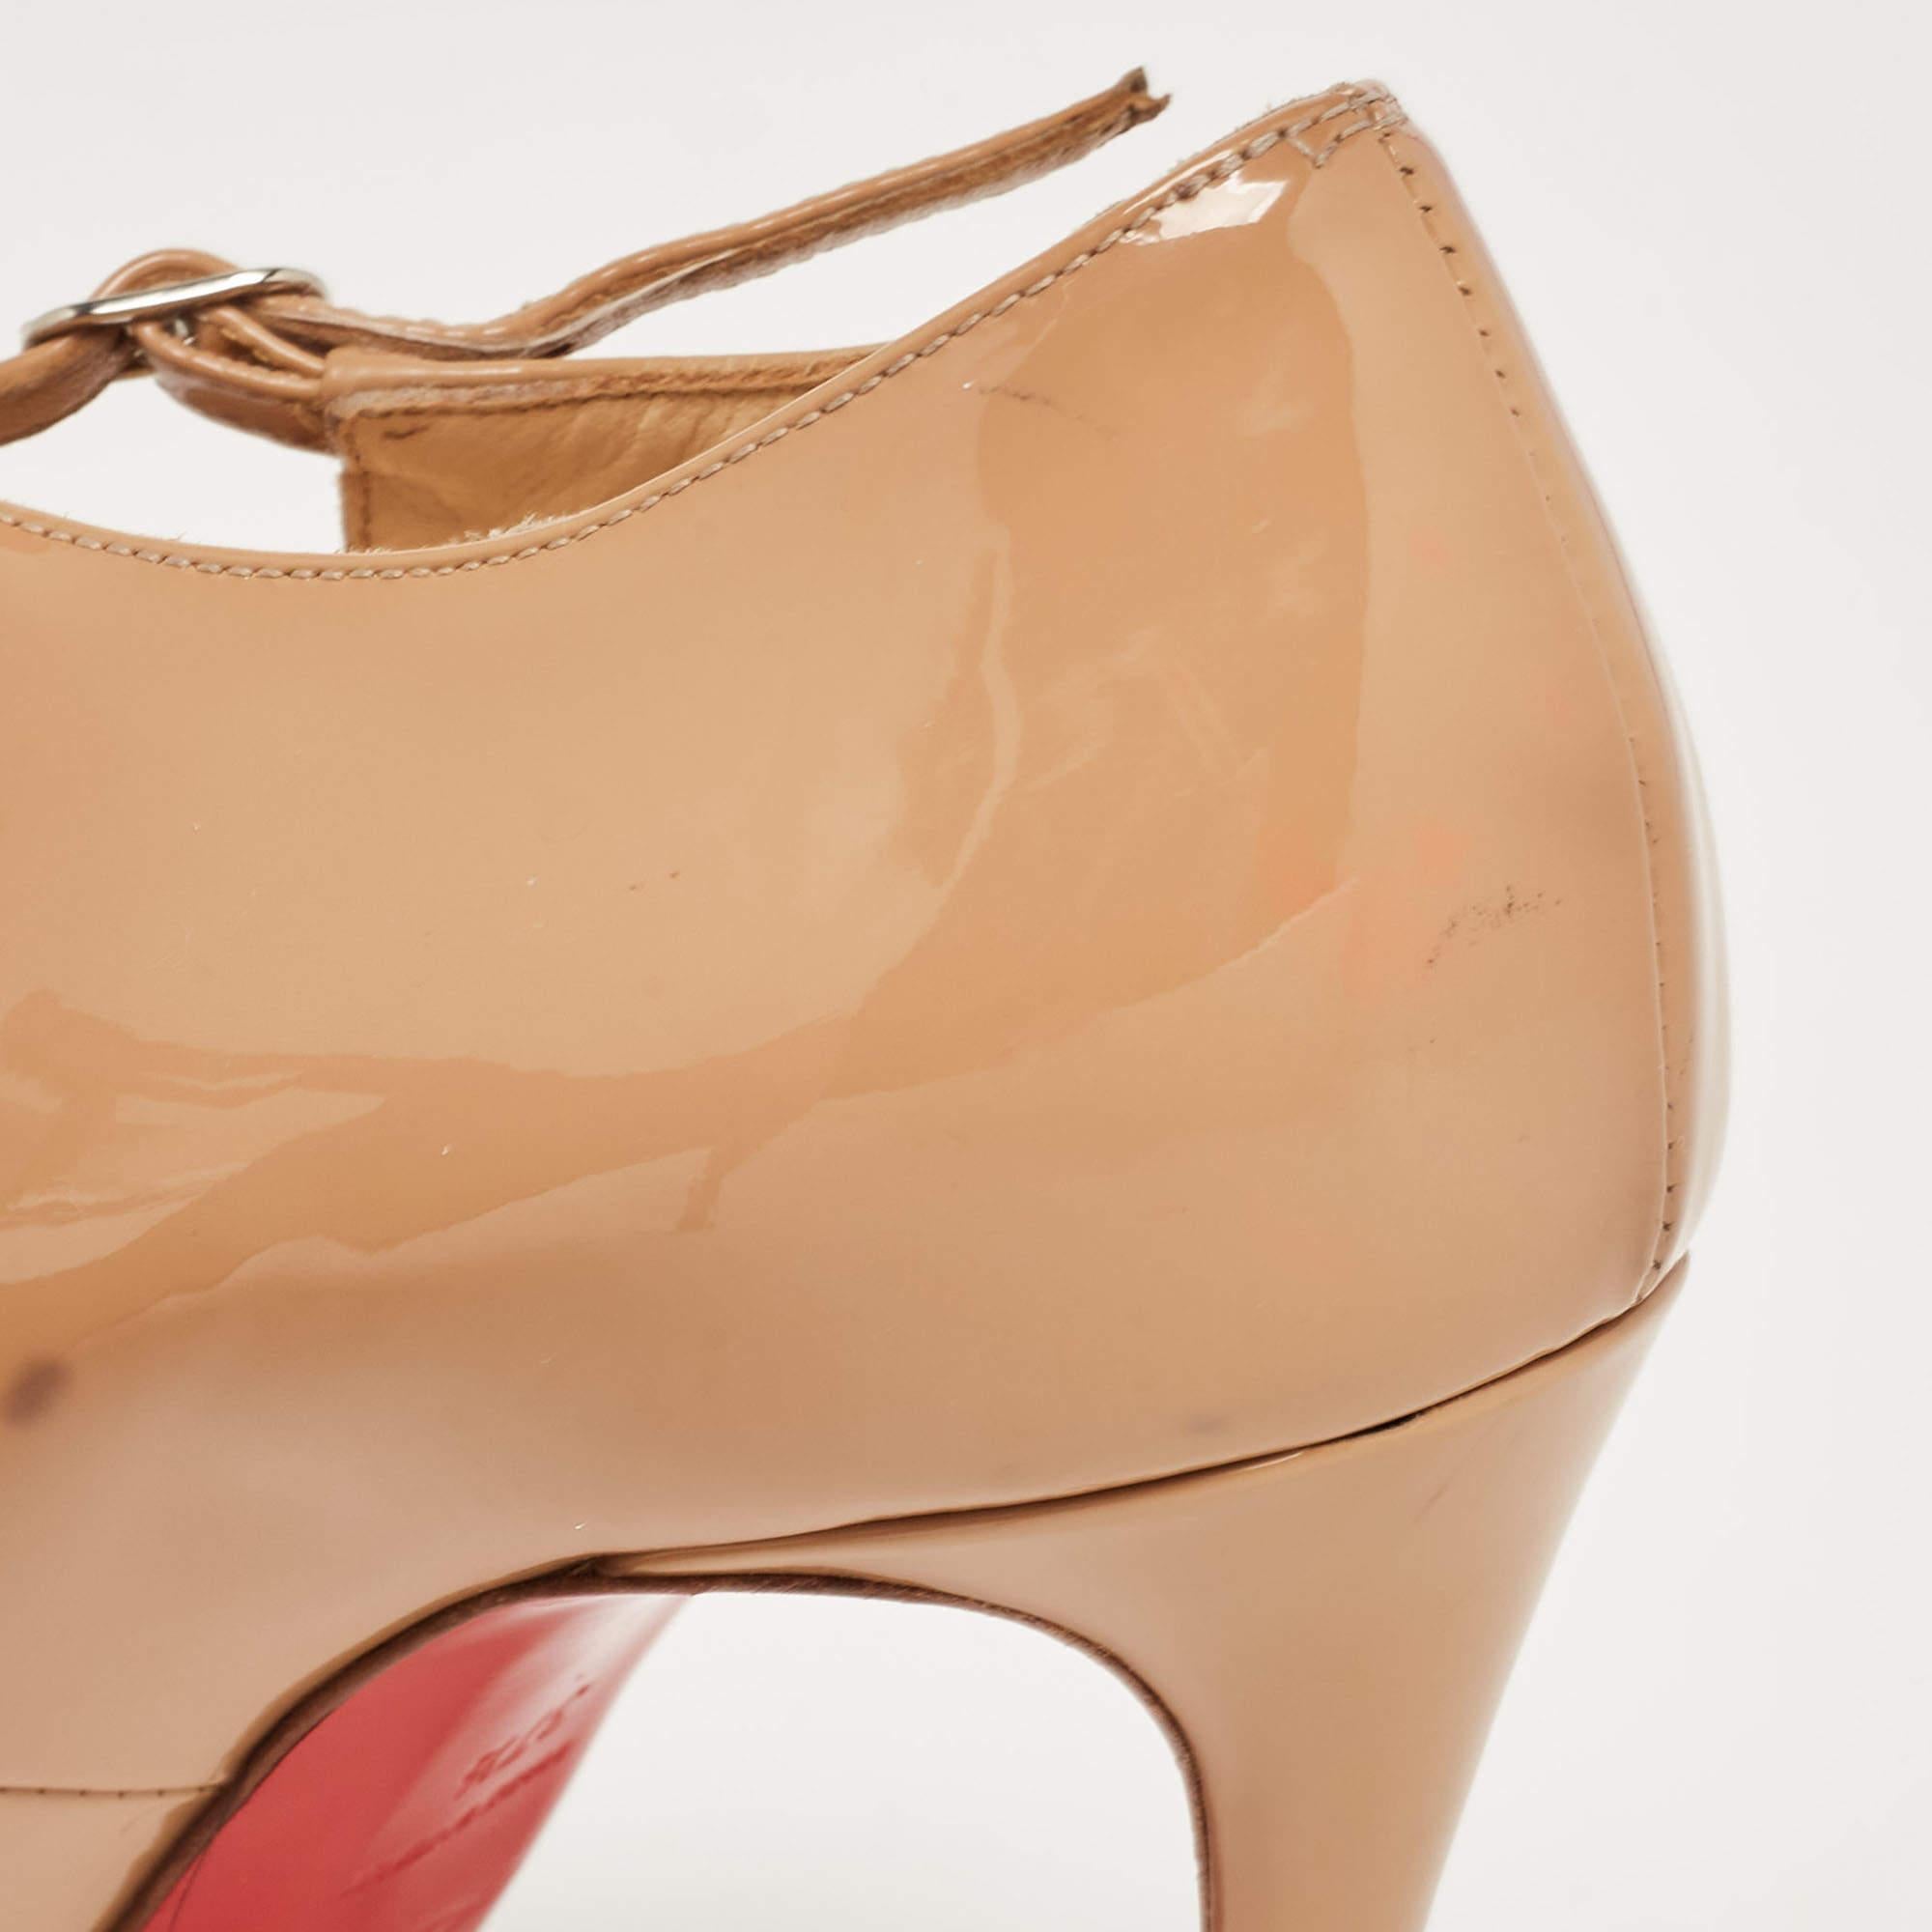 Christian Louboutin Beige Patent TPoppins Pumps Size 37.5 For Sale 3